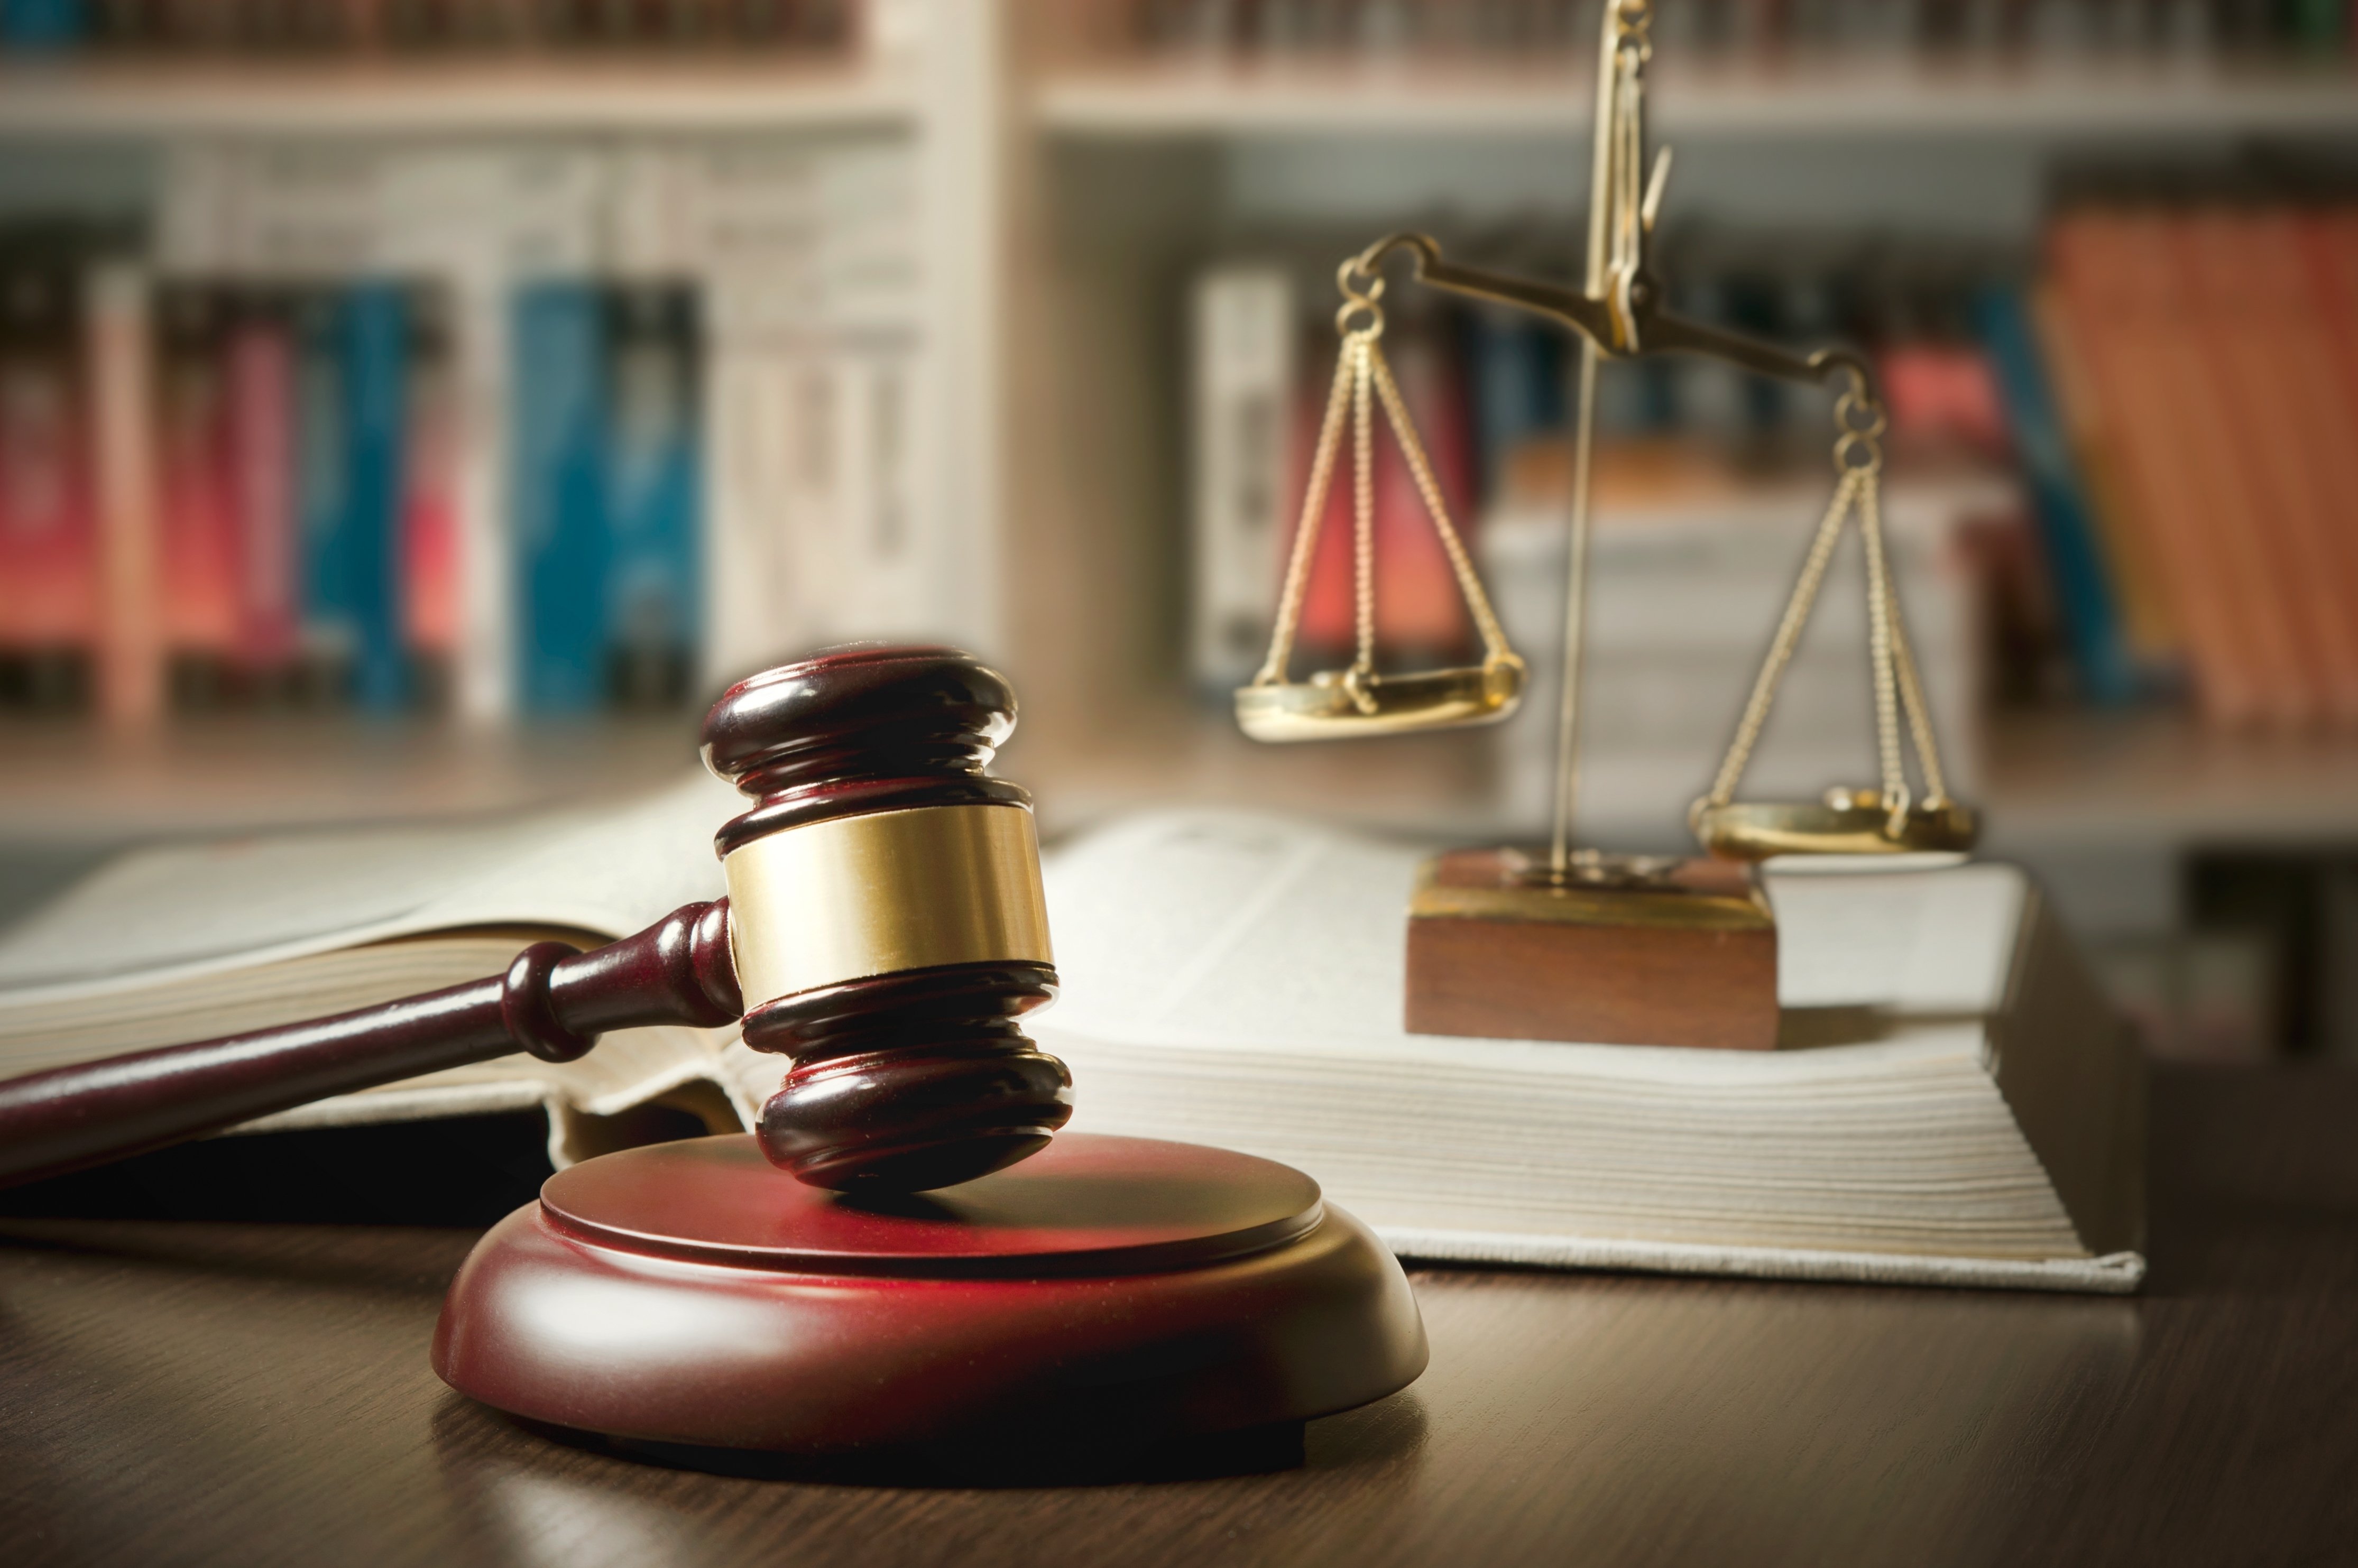 Judge gavel and scale in court | Photo: Shutterstock.com